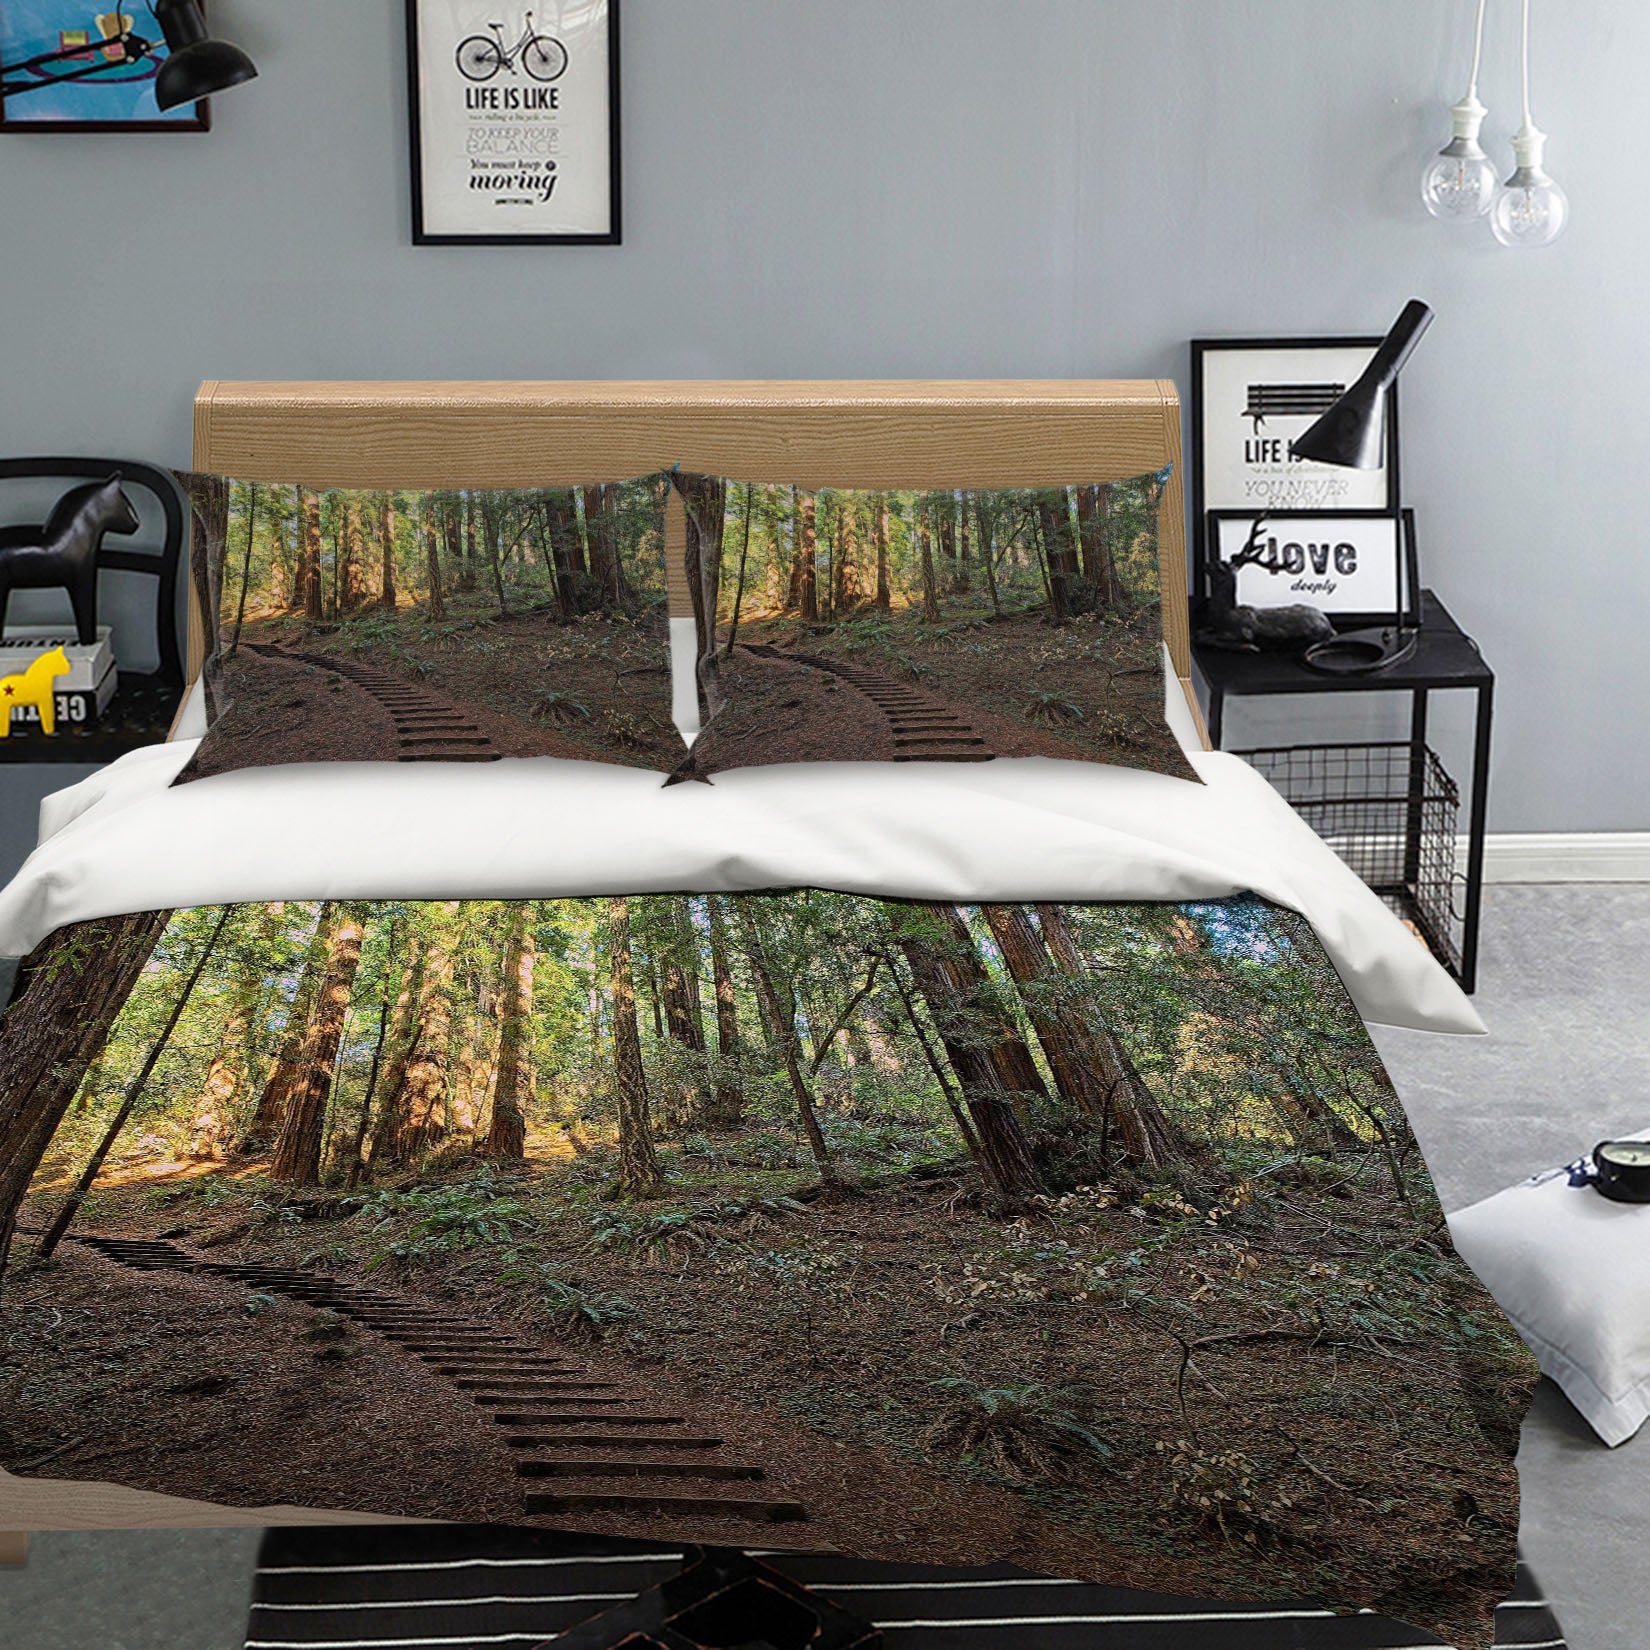 3D Forest Walkway 62179 Kathy Barefield Bedding Bed Pillowcases Quilt